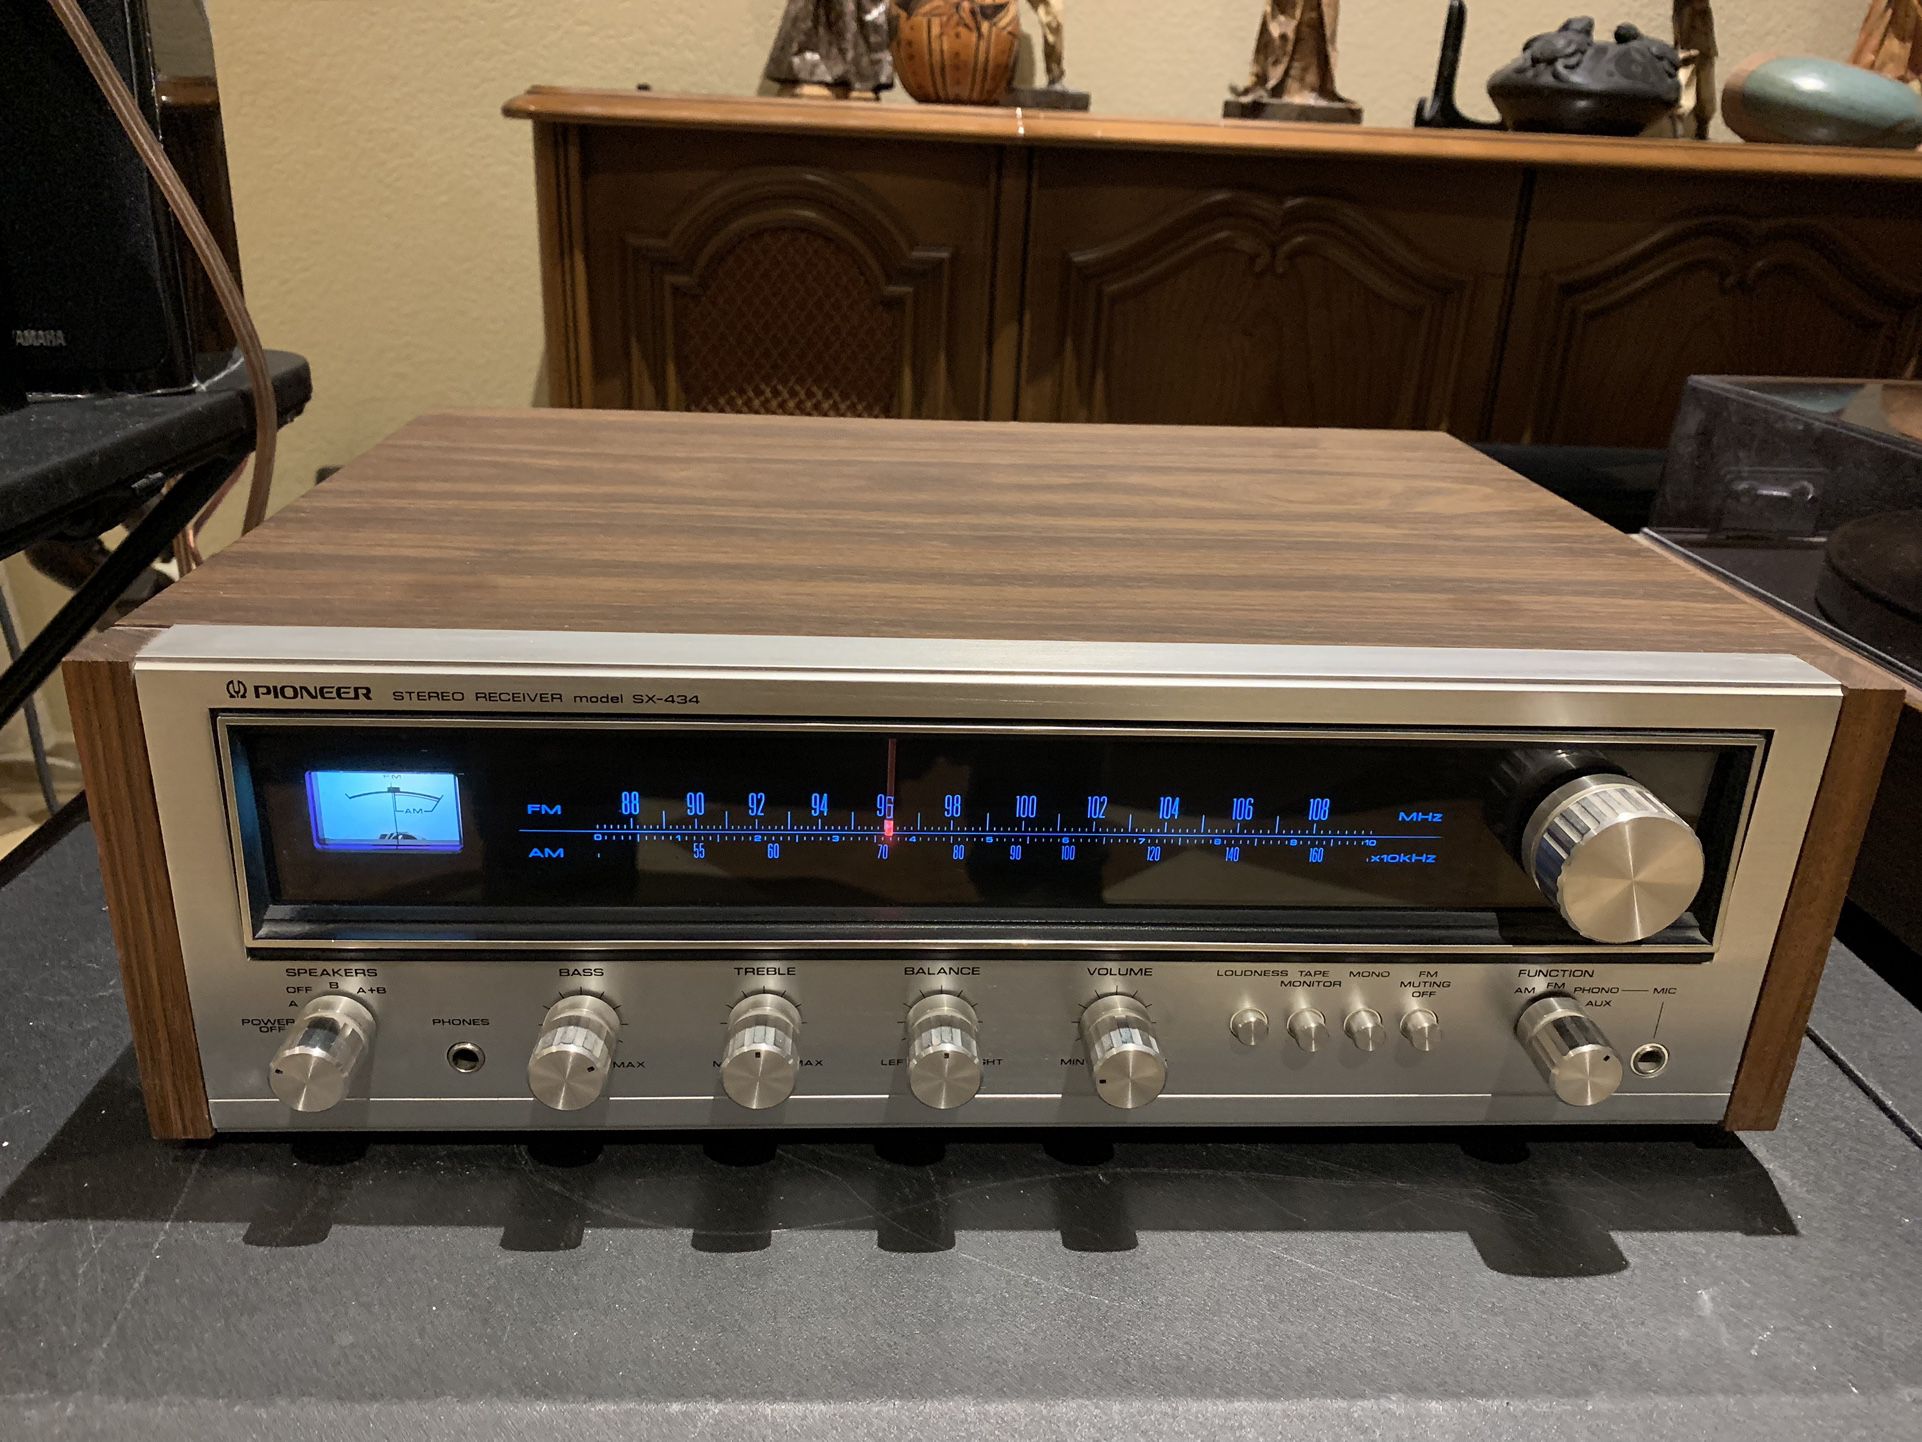 VINTAGE PIONEER STEREO RECEIVER (SX-434) for Sale in Tucson, AZ